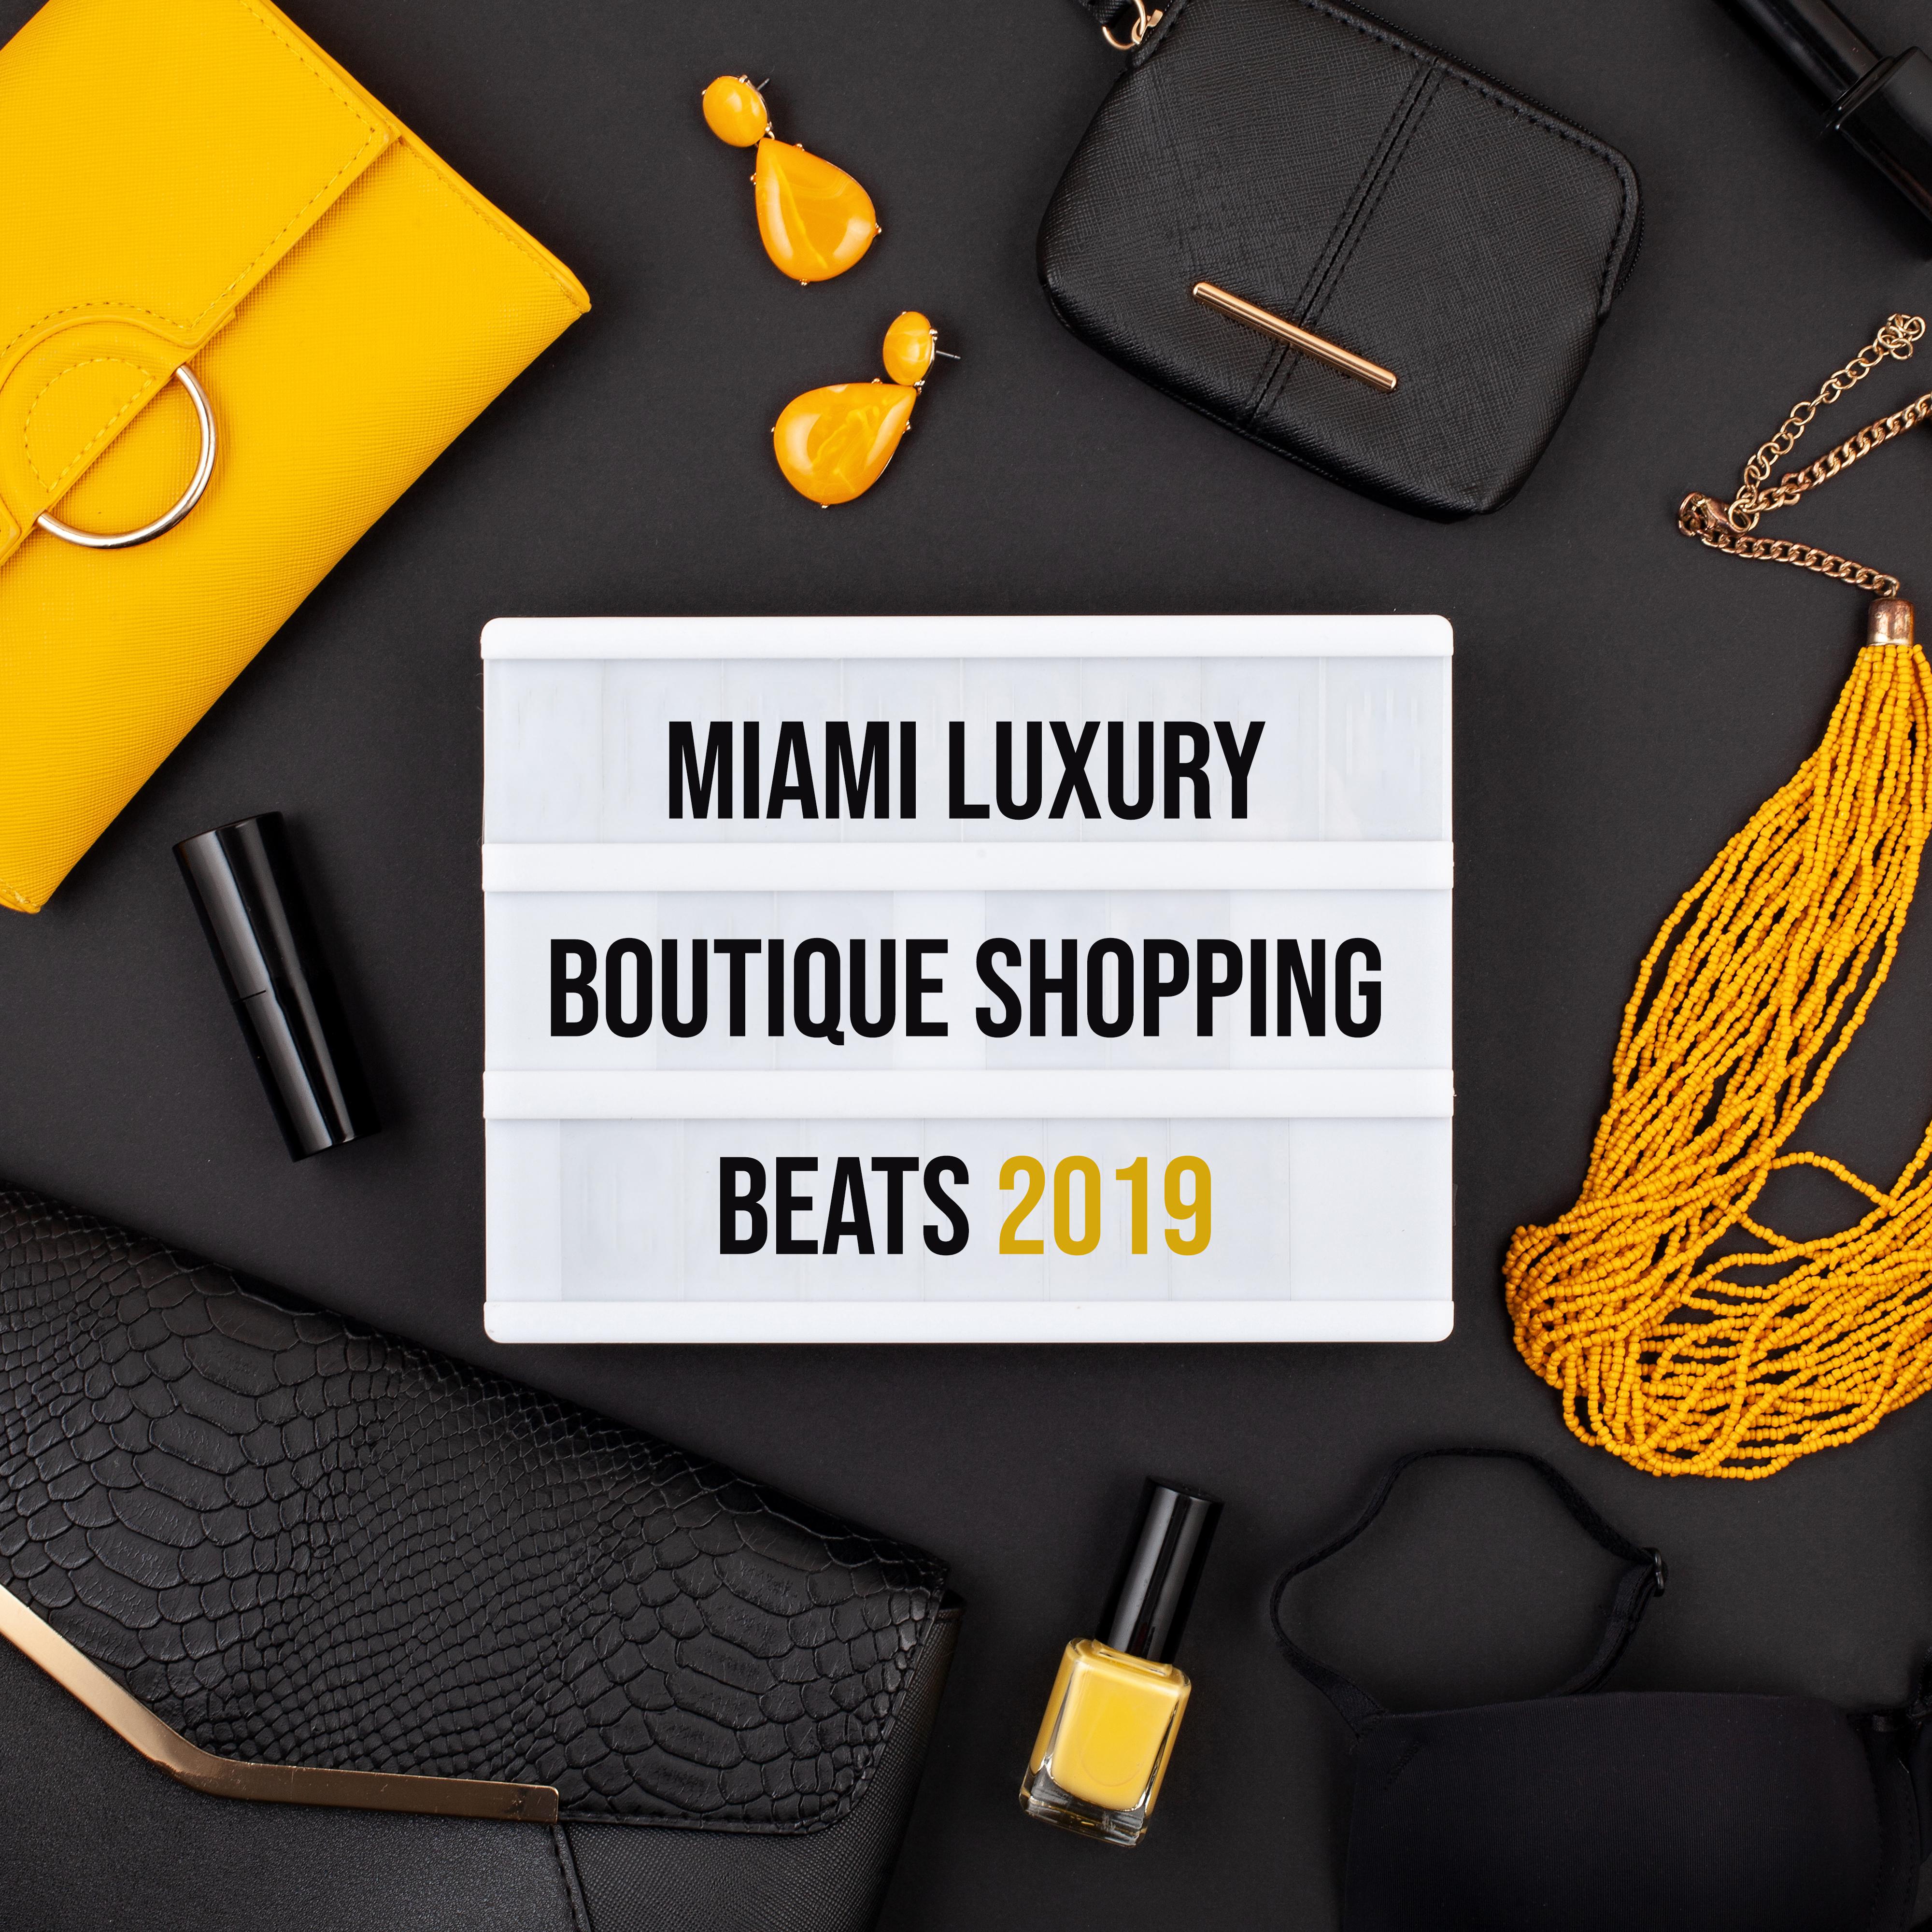 Miami Luxury Boutique Shopping Beats 2019  Compilation of Sunny Chillout Music for Shops with Clothes  Elegant Boutiques, Beats for Pleasant Shopping